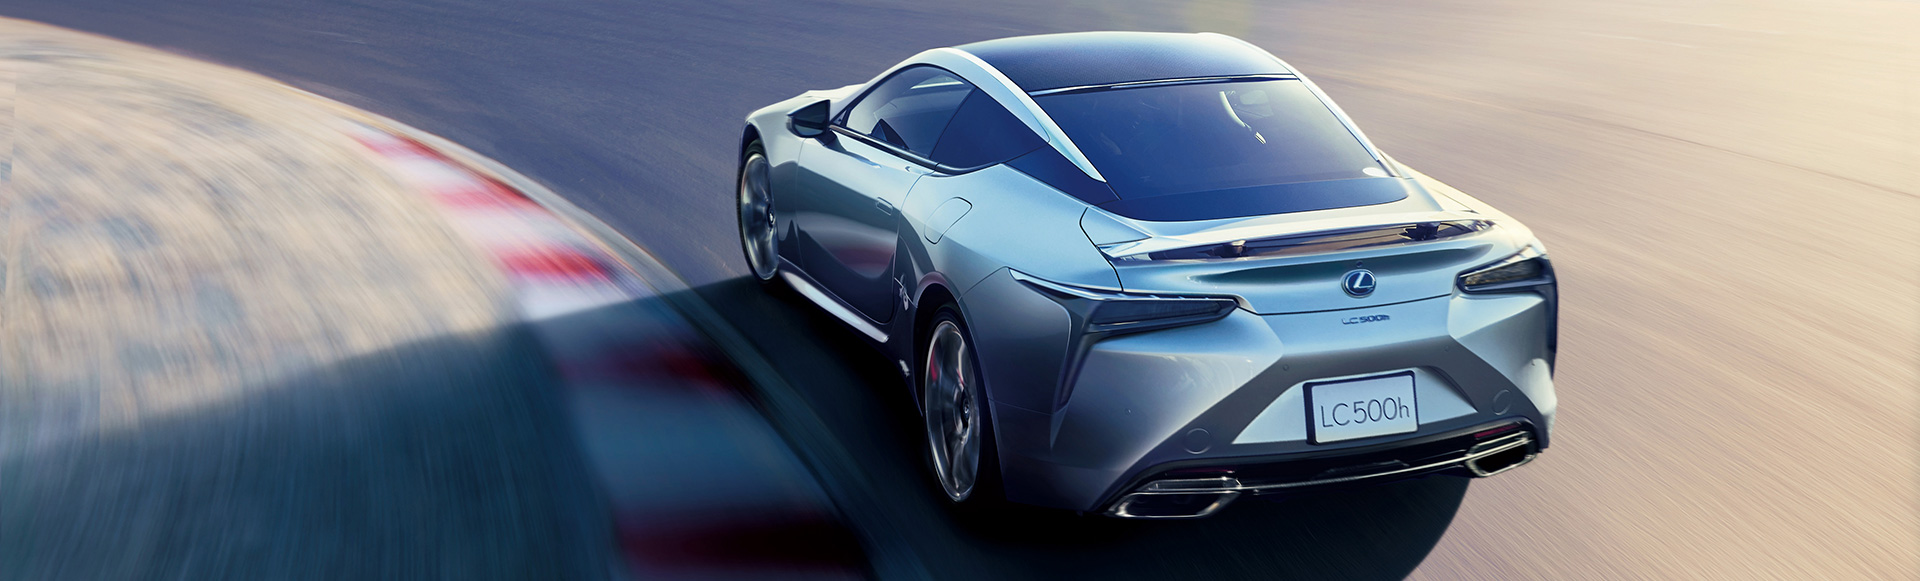 Lexus Launches the New 'LC' Luxury Coupe